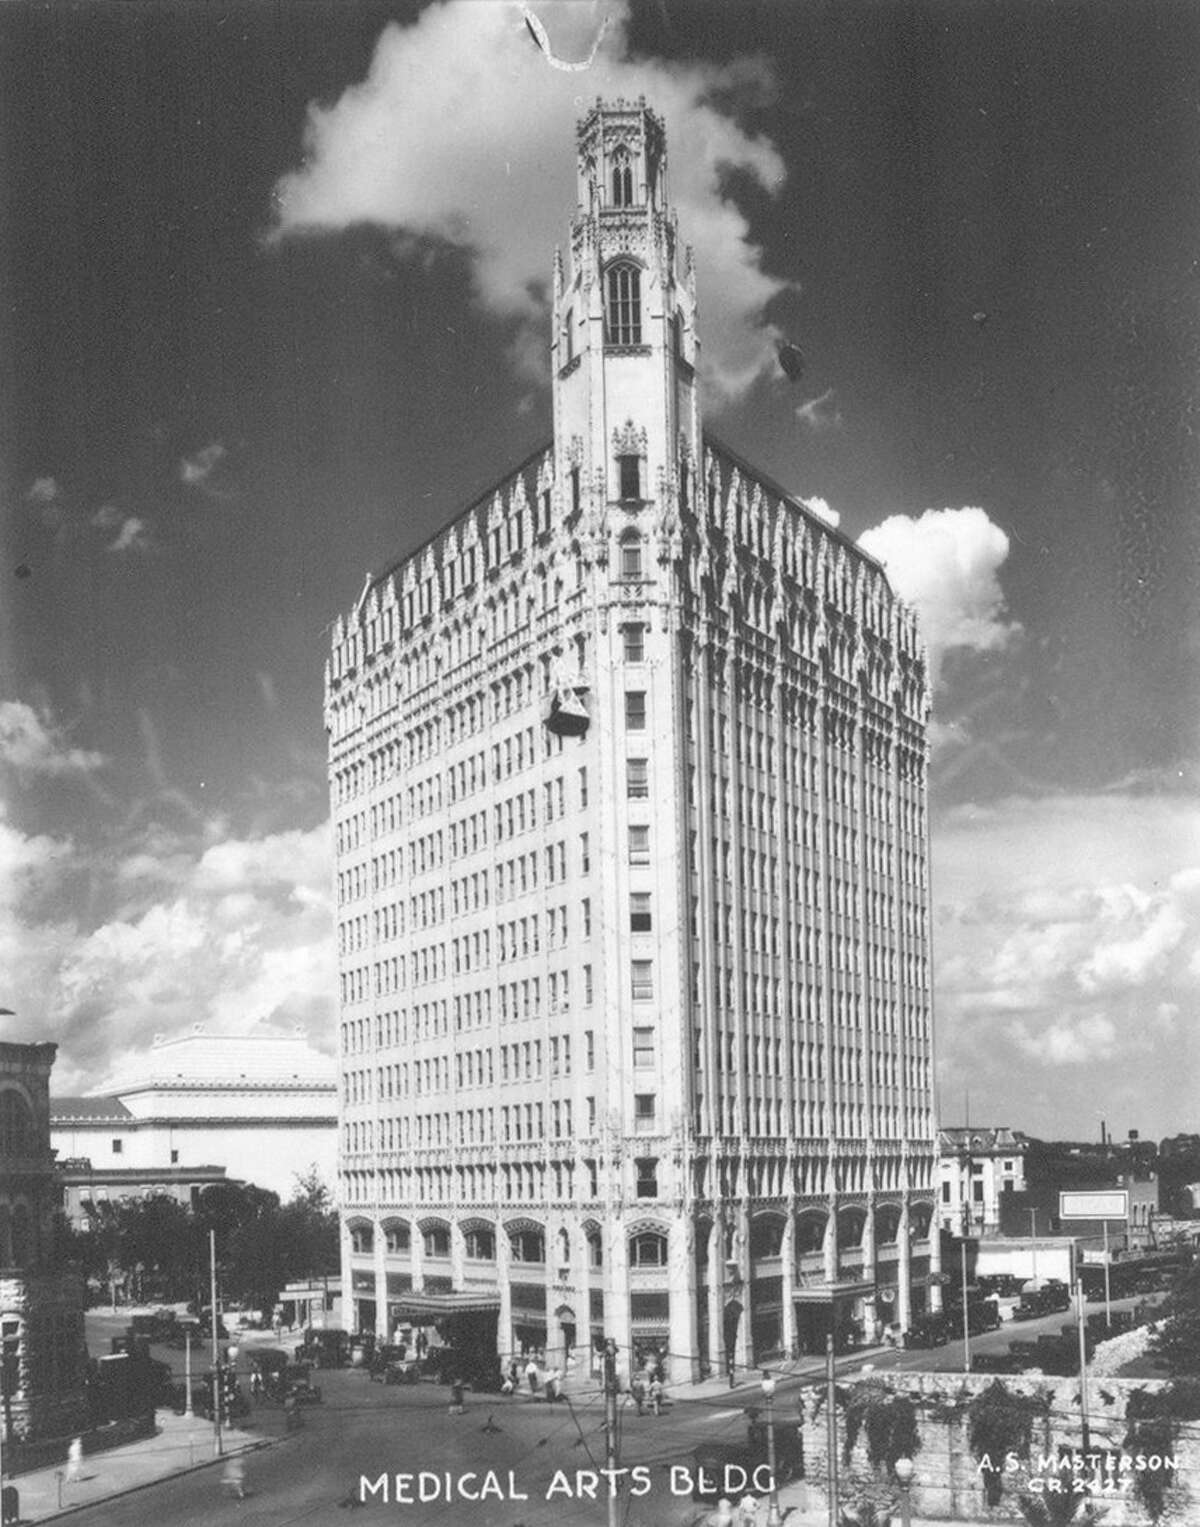 The Medical Arts Building, now the Emily Morgan Hotel, is shown in this 1928 photo.